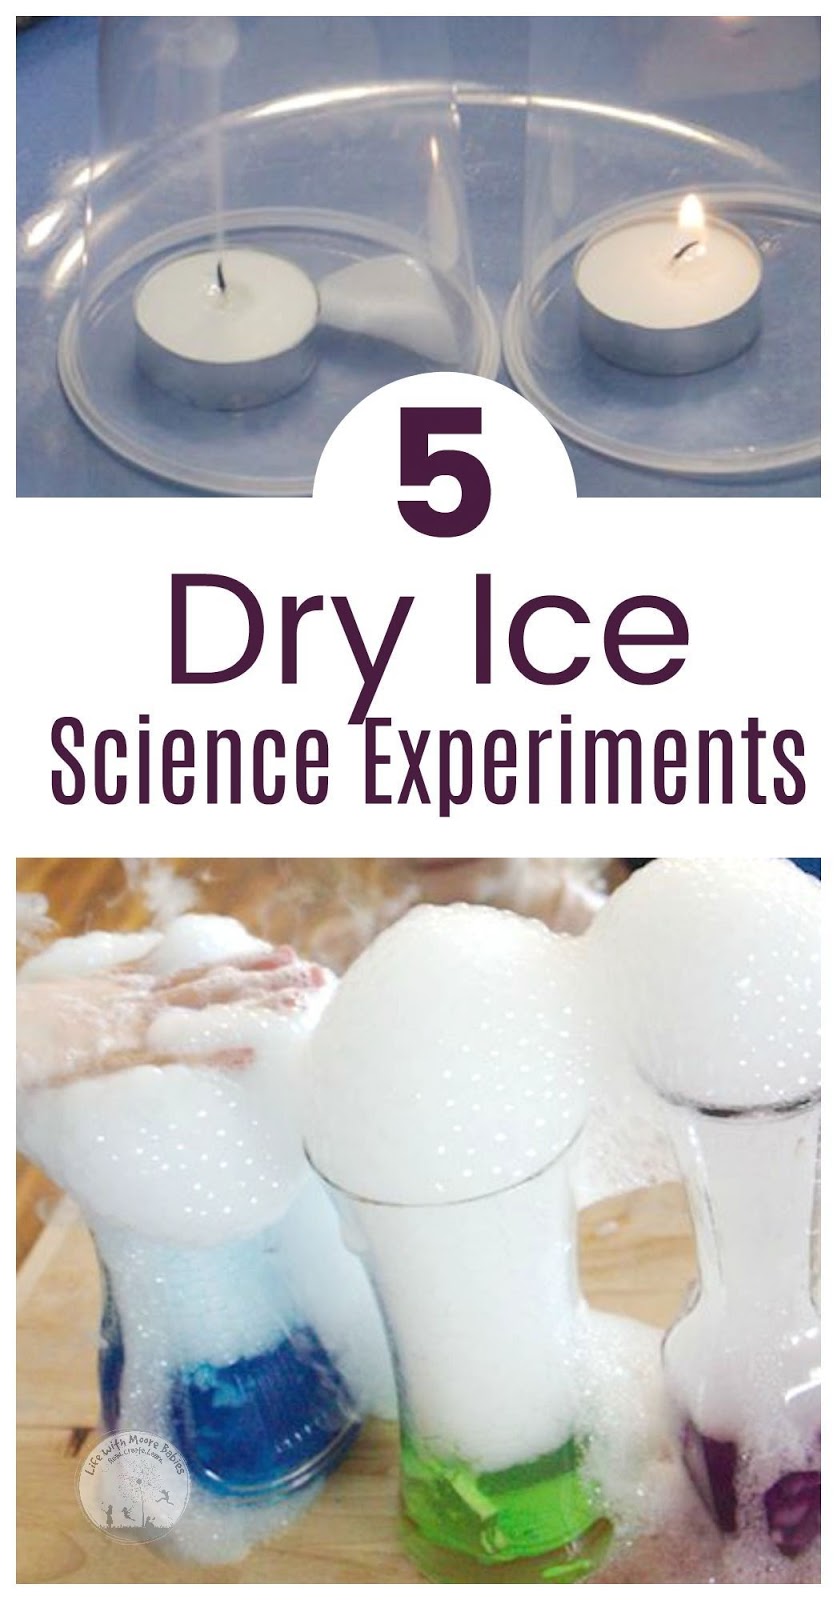 Amazing Science Experiments for Kids with Dry Ice - Life with Moore Babies